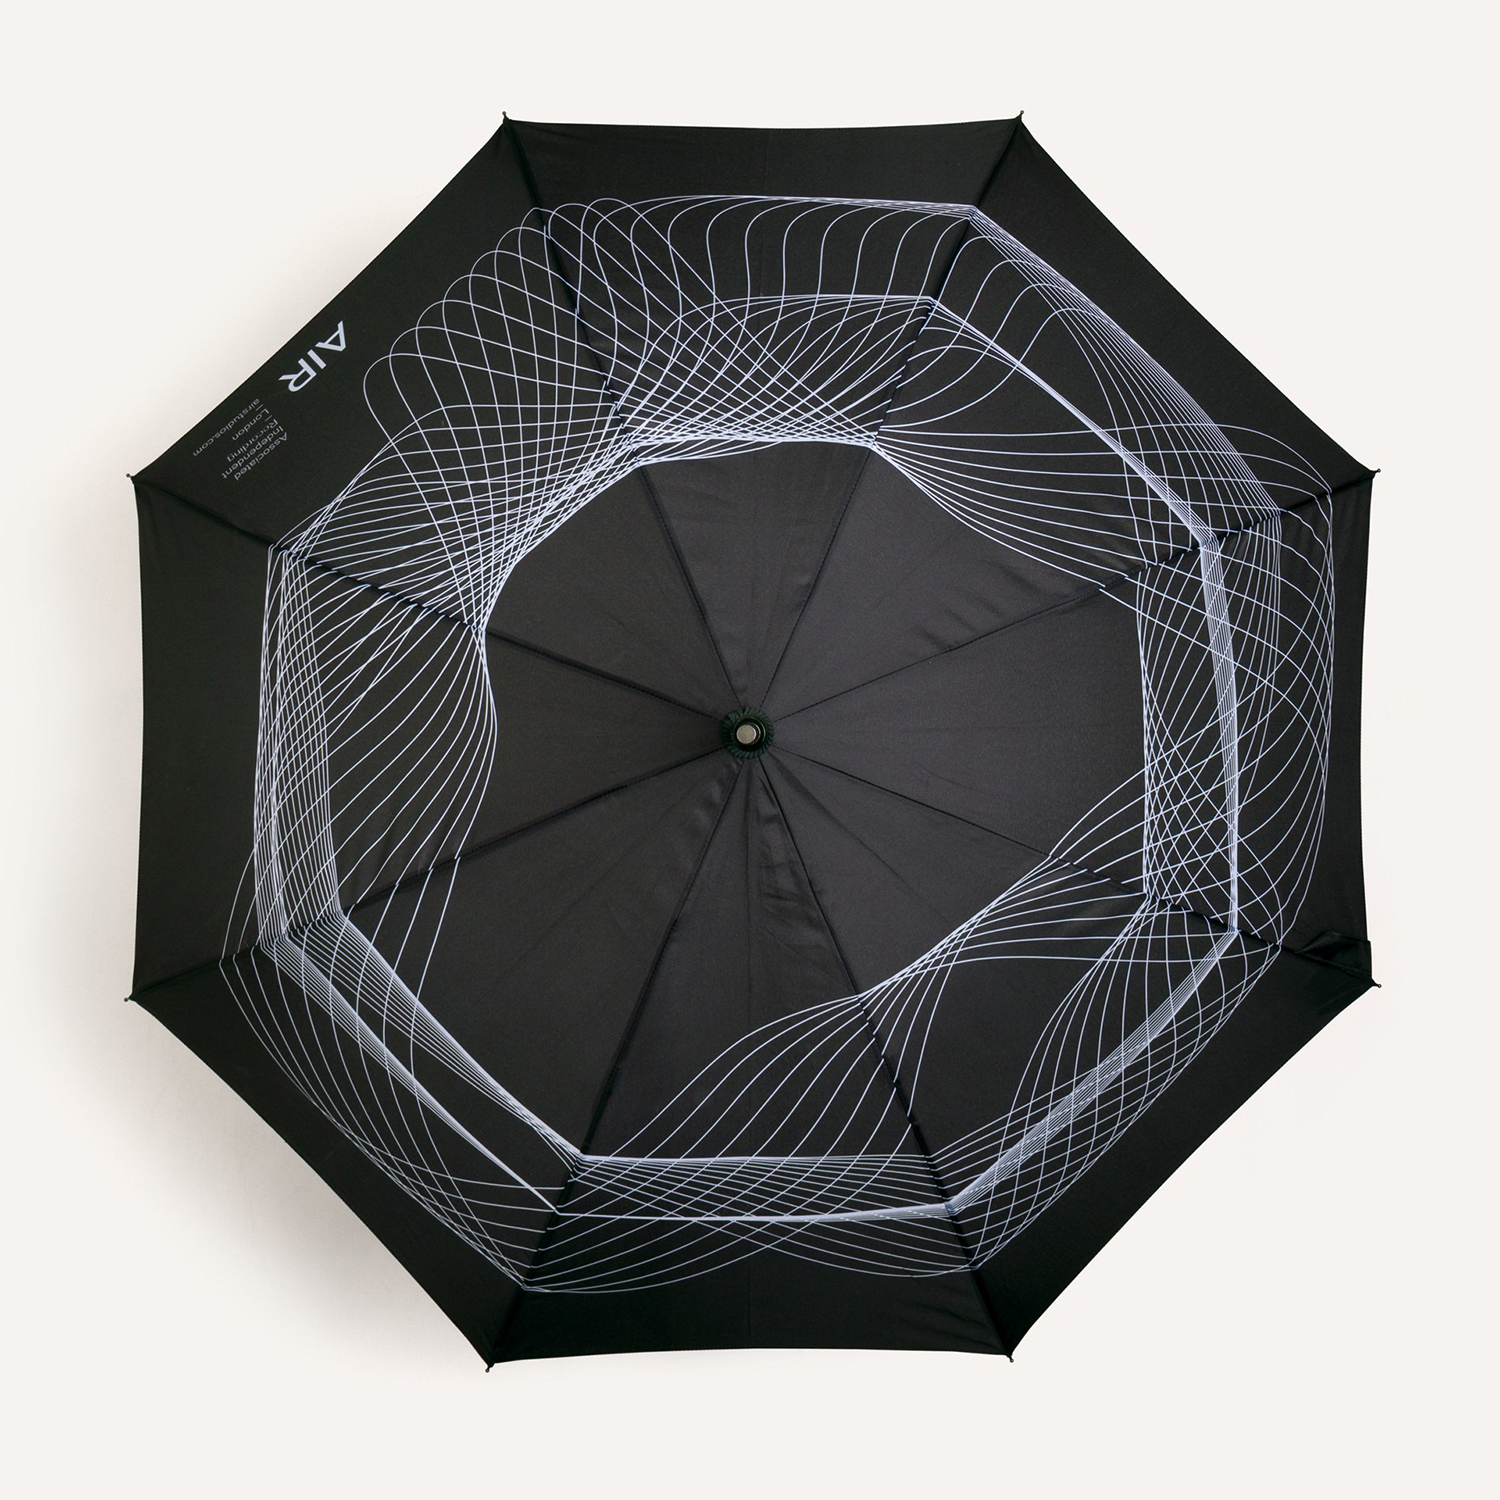 Logo and branded umbrella designed by Spin for London-based Air Studios, home of the world’s largest recording rooms